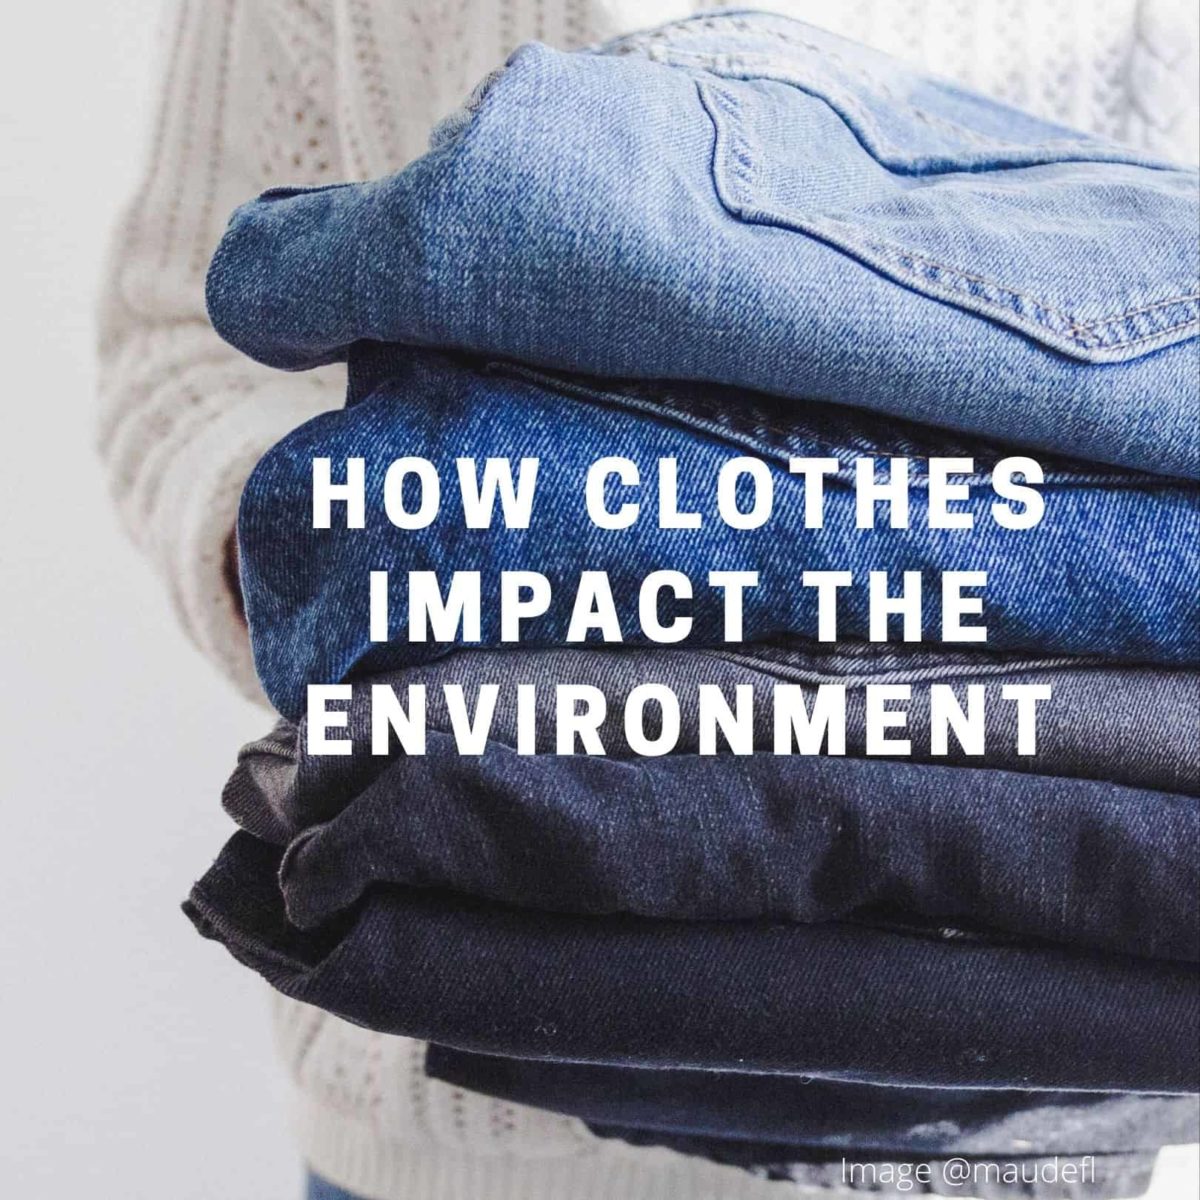 person holding stack folded jeans with text how clothes impact the environement overlaid on image